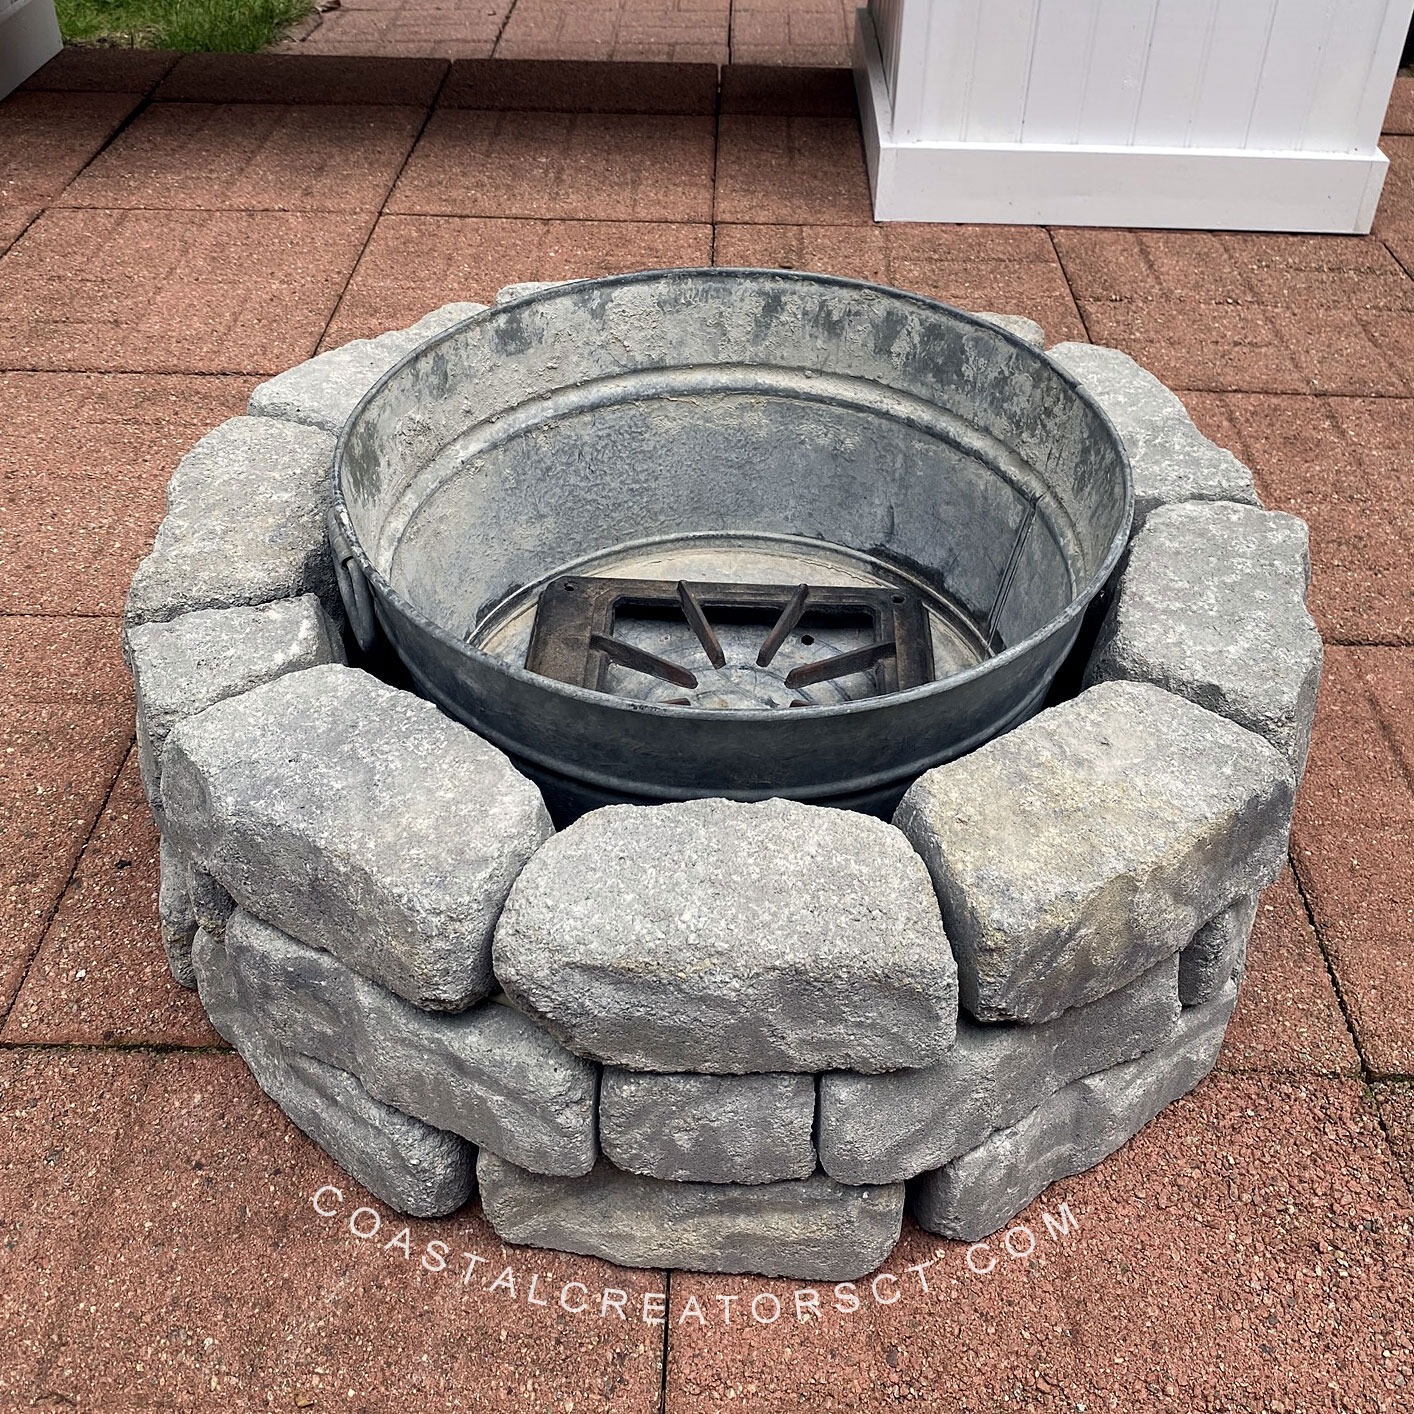 Build A Backyard Fire Pit In One Hour, Construction Adhesive For Fire Pit